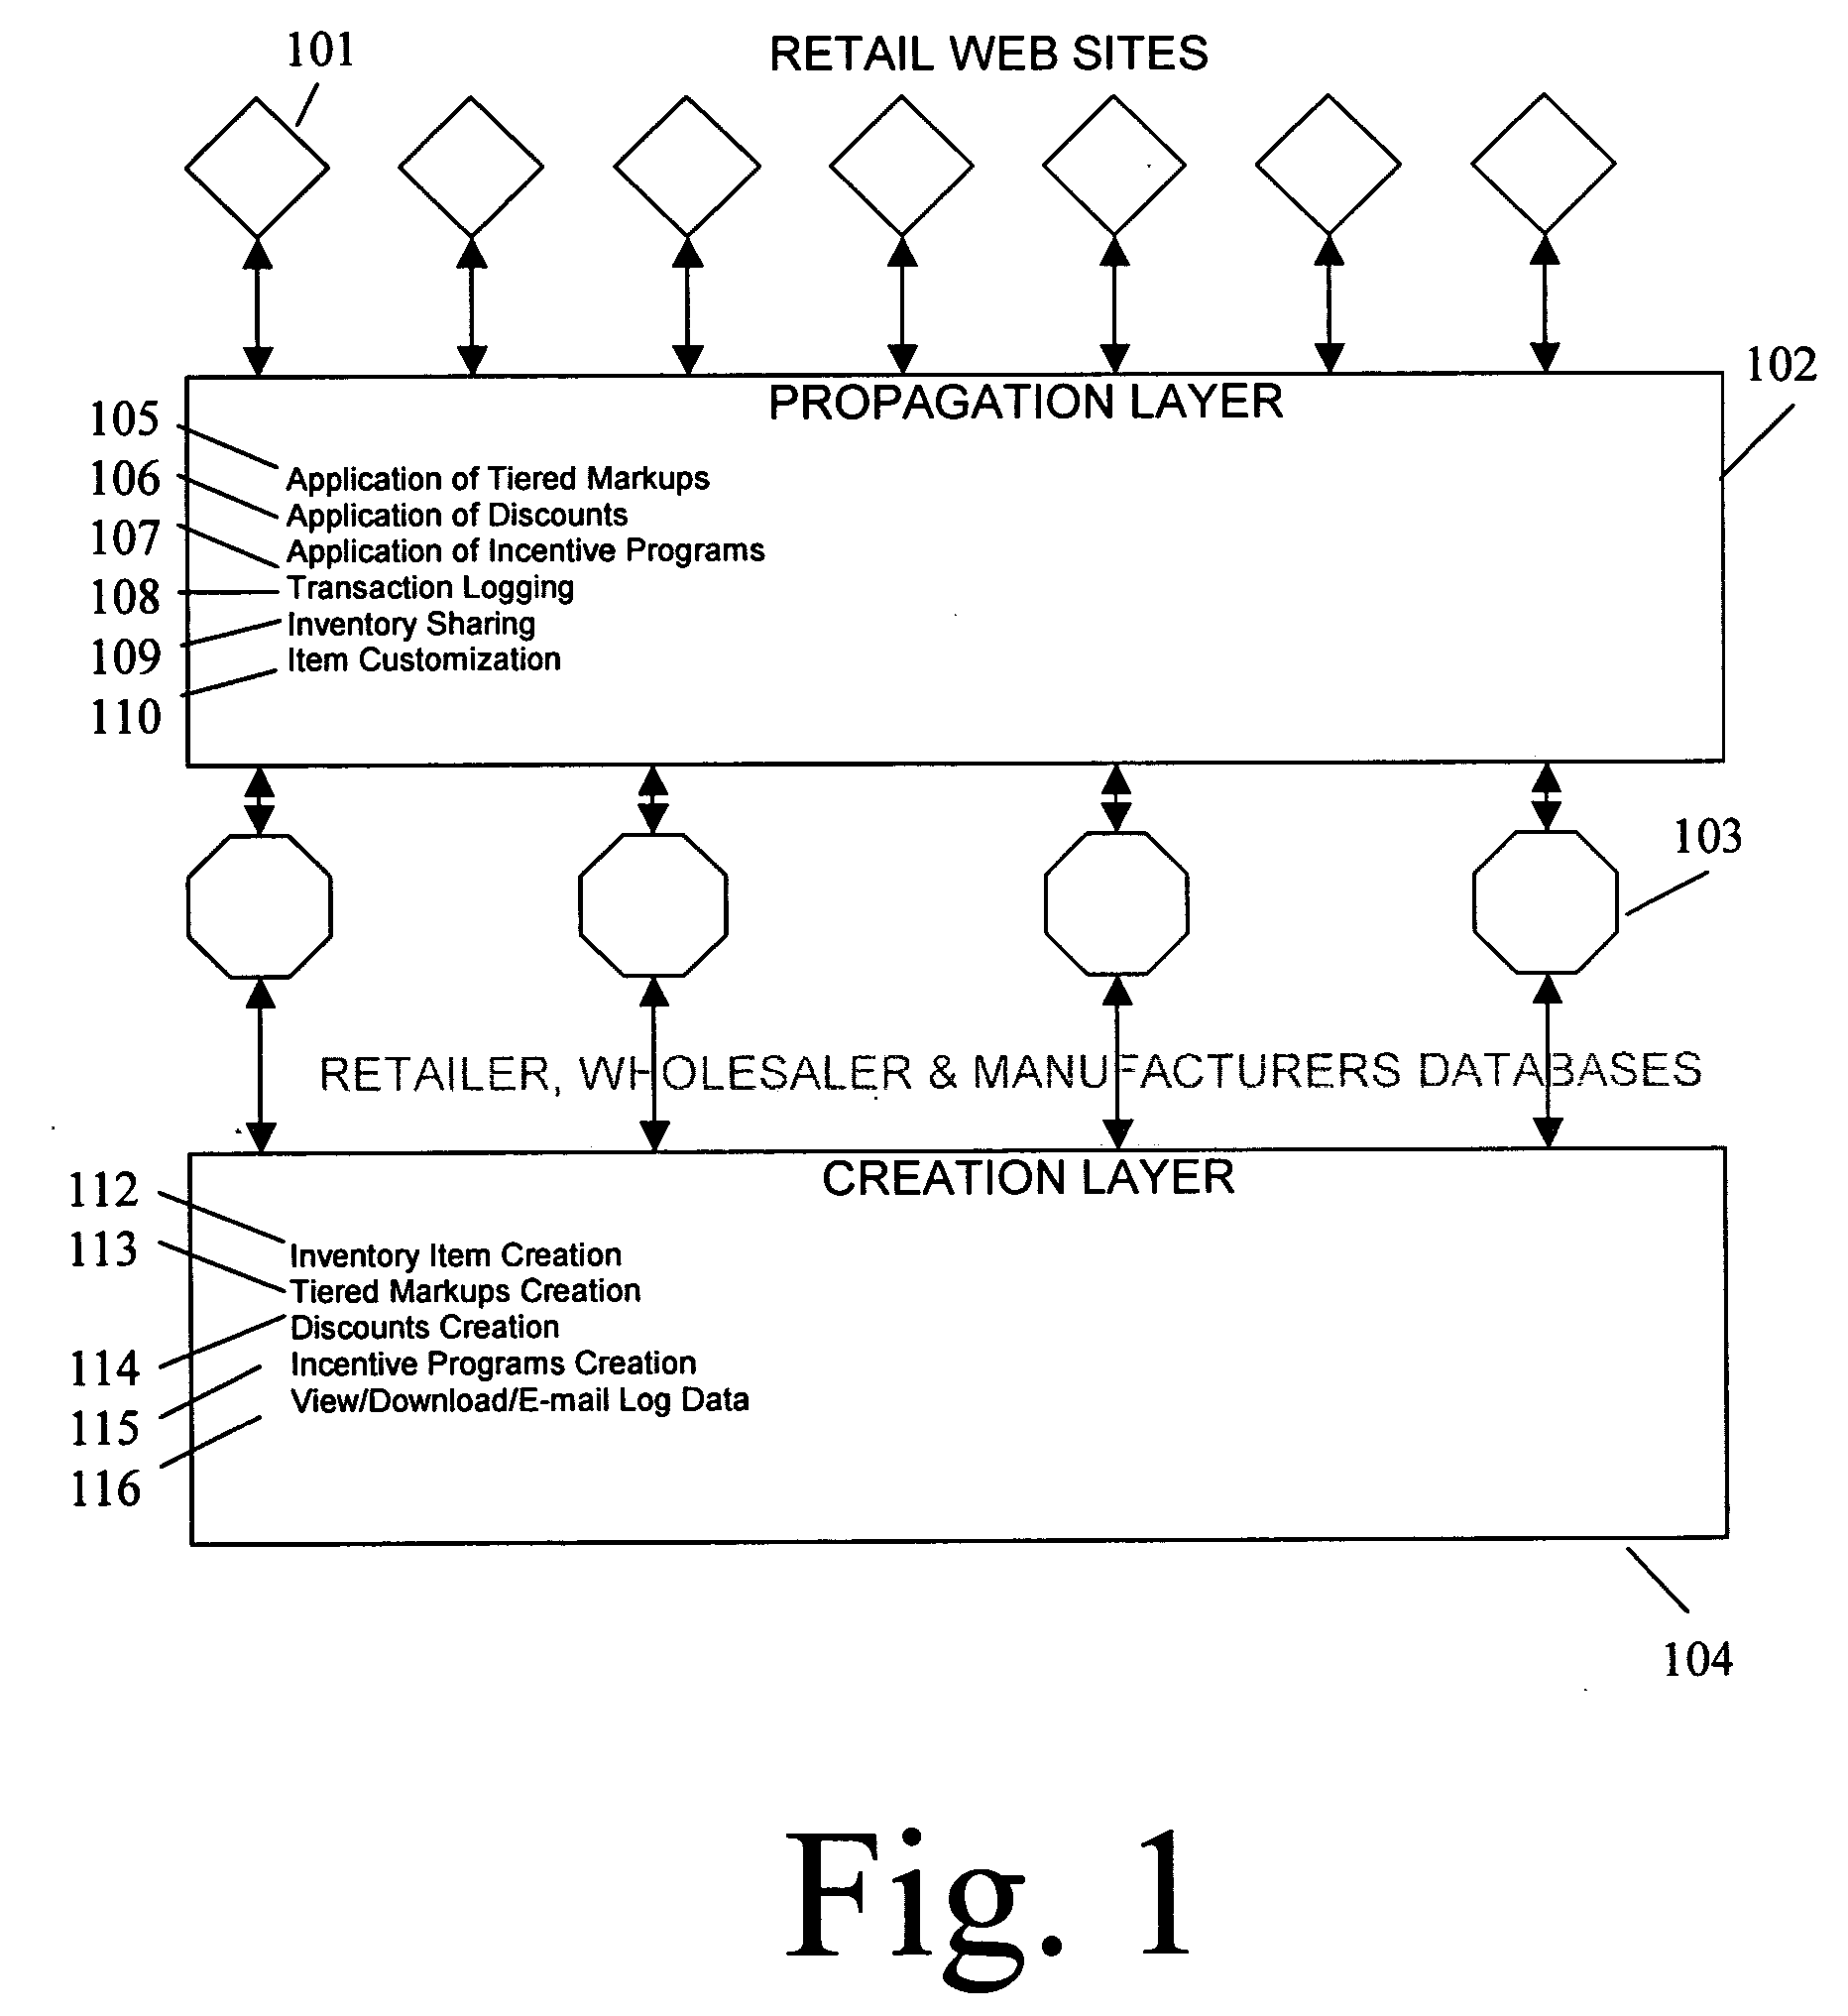 System and method for an electronic commerce product for managing the pricing, inventory, sales, and selection of goods and services offered for sale